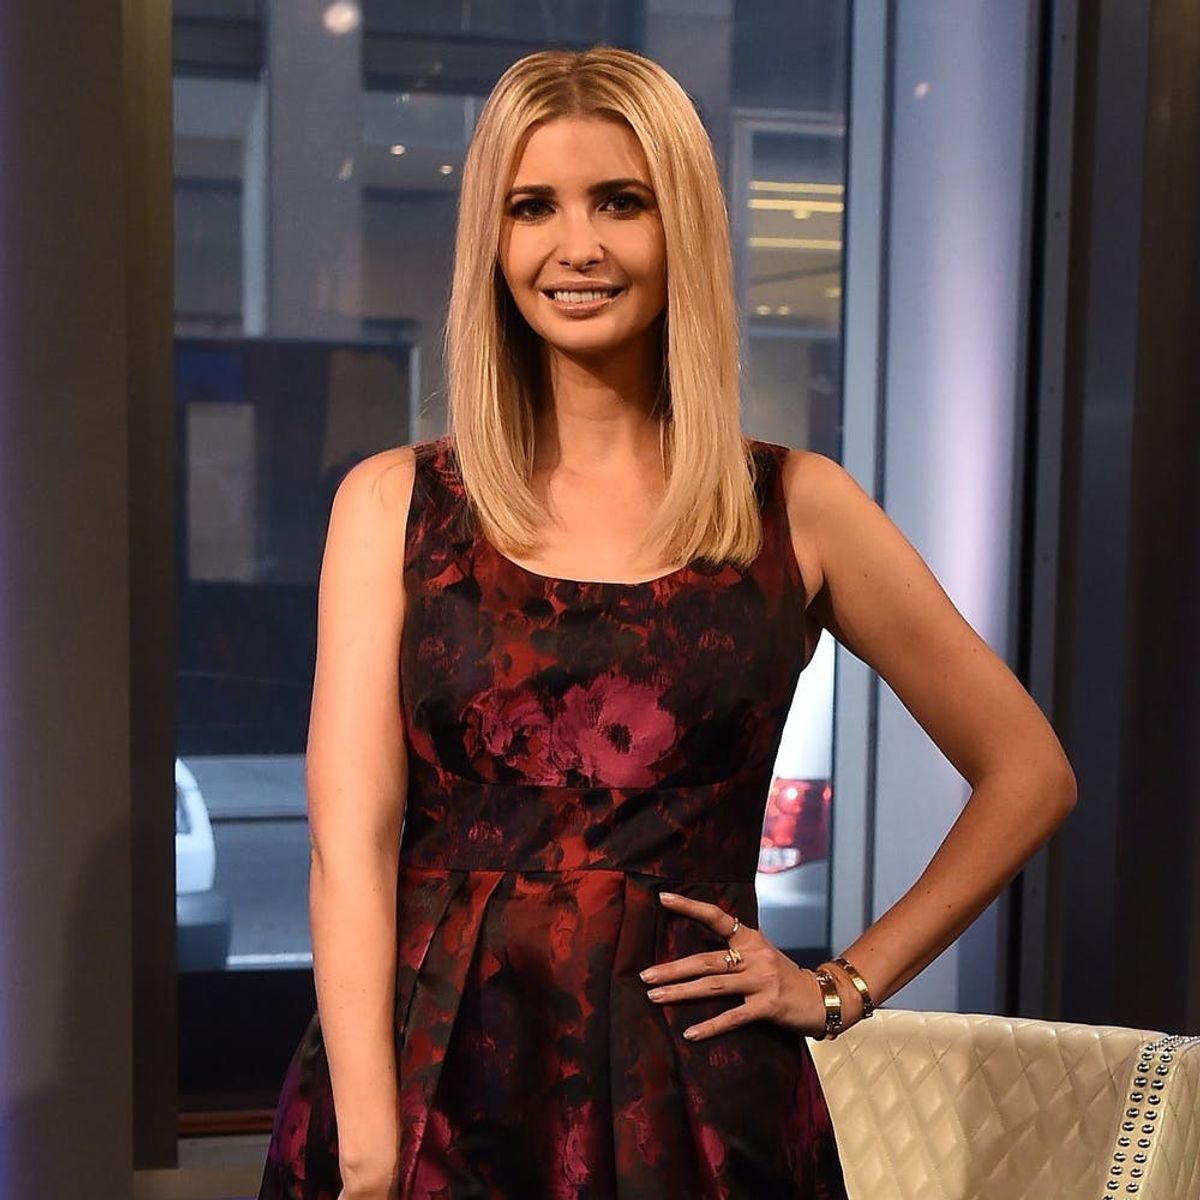 A Cup of Coffee With Ivanka Trump Is Going for $50,000 Online